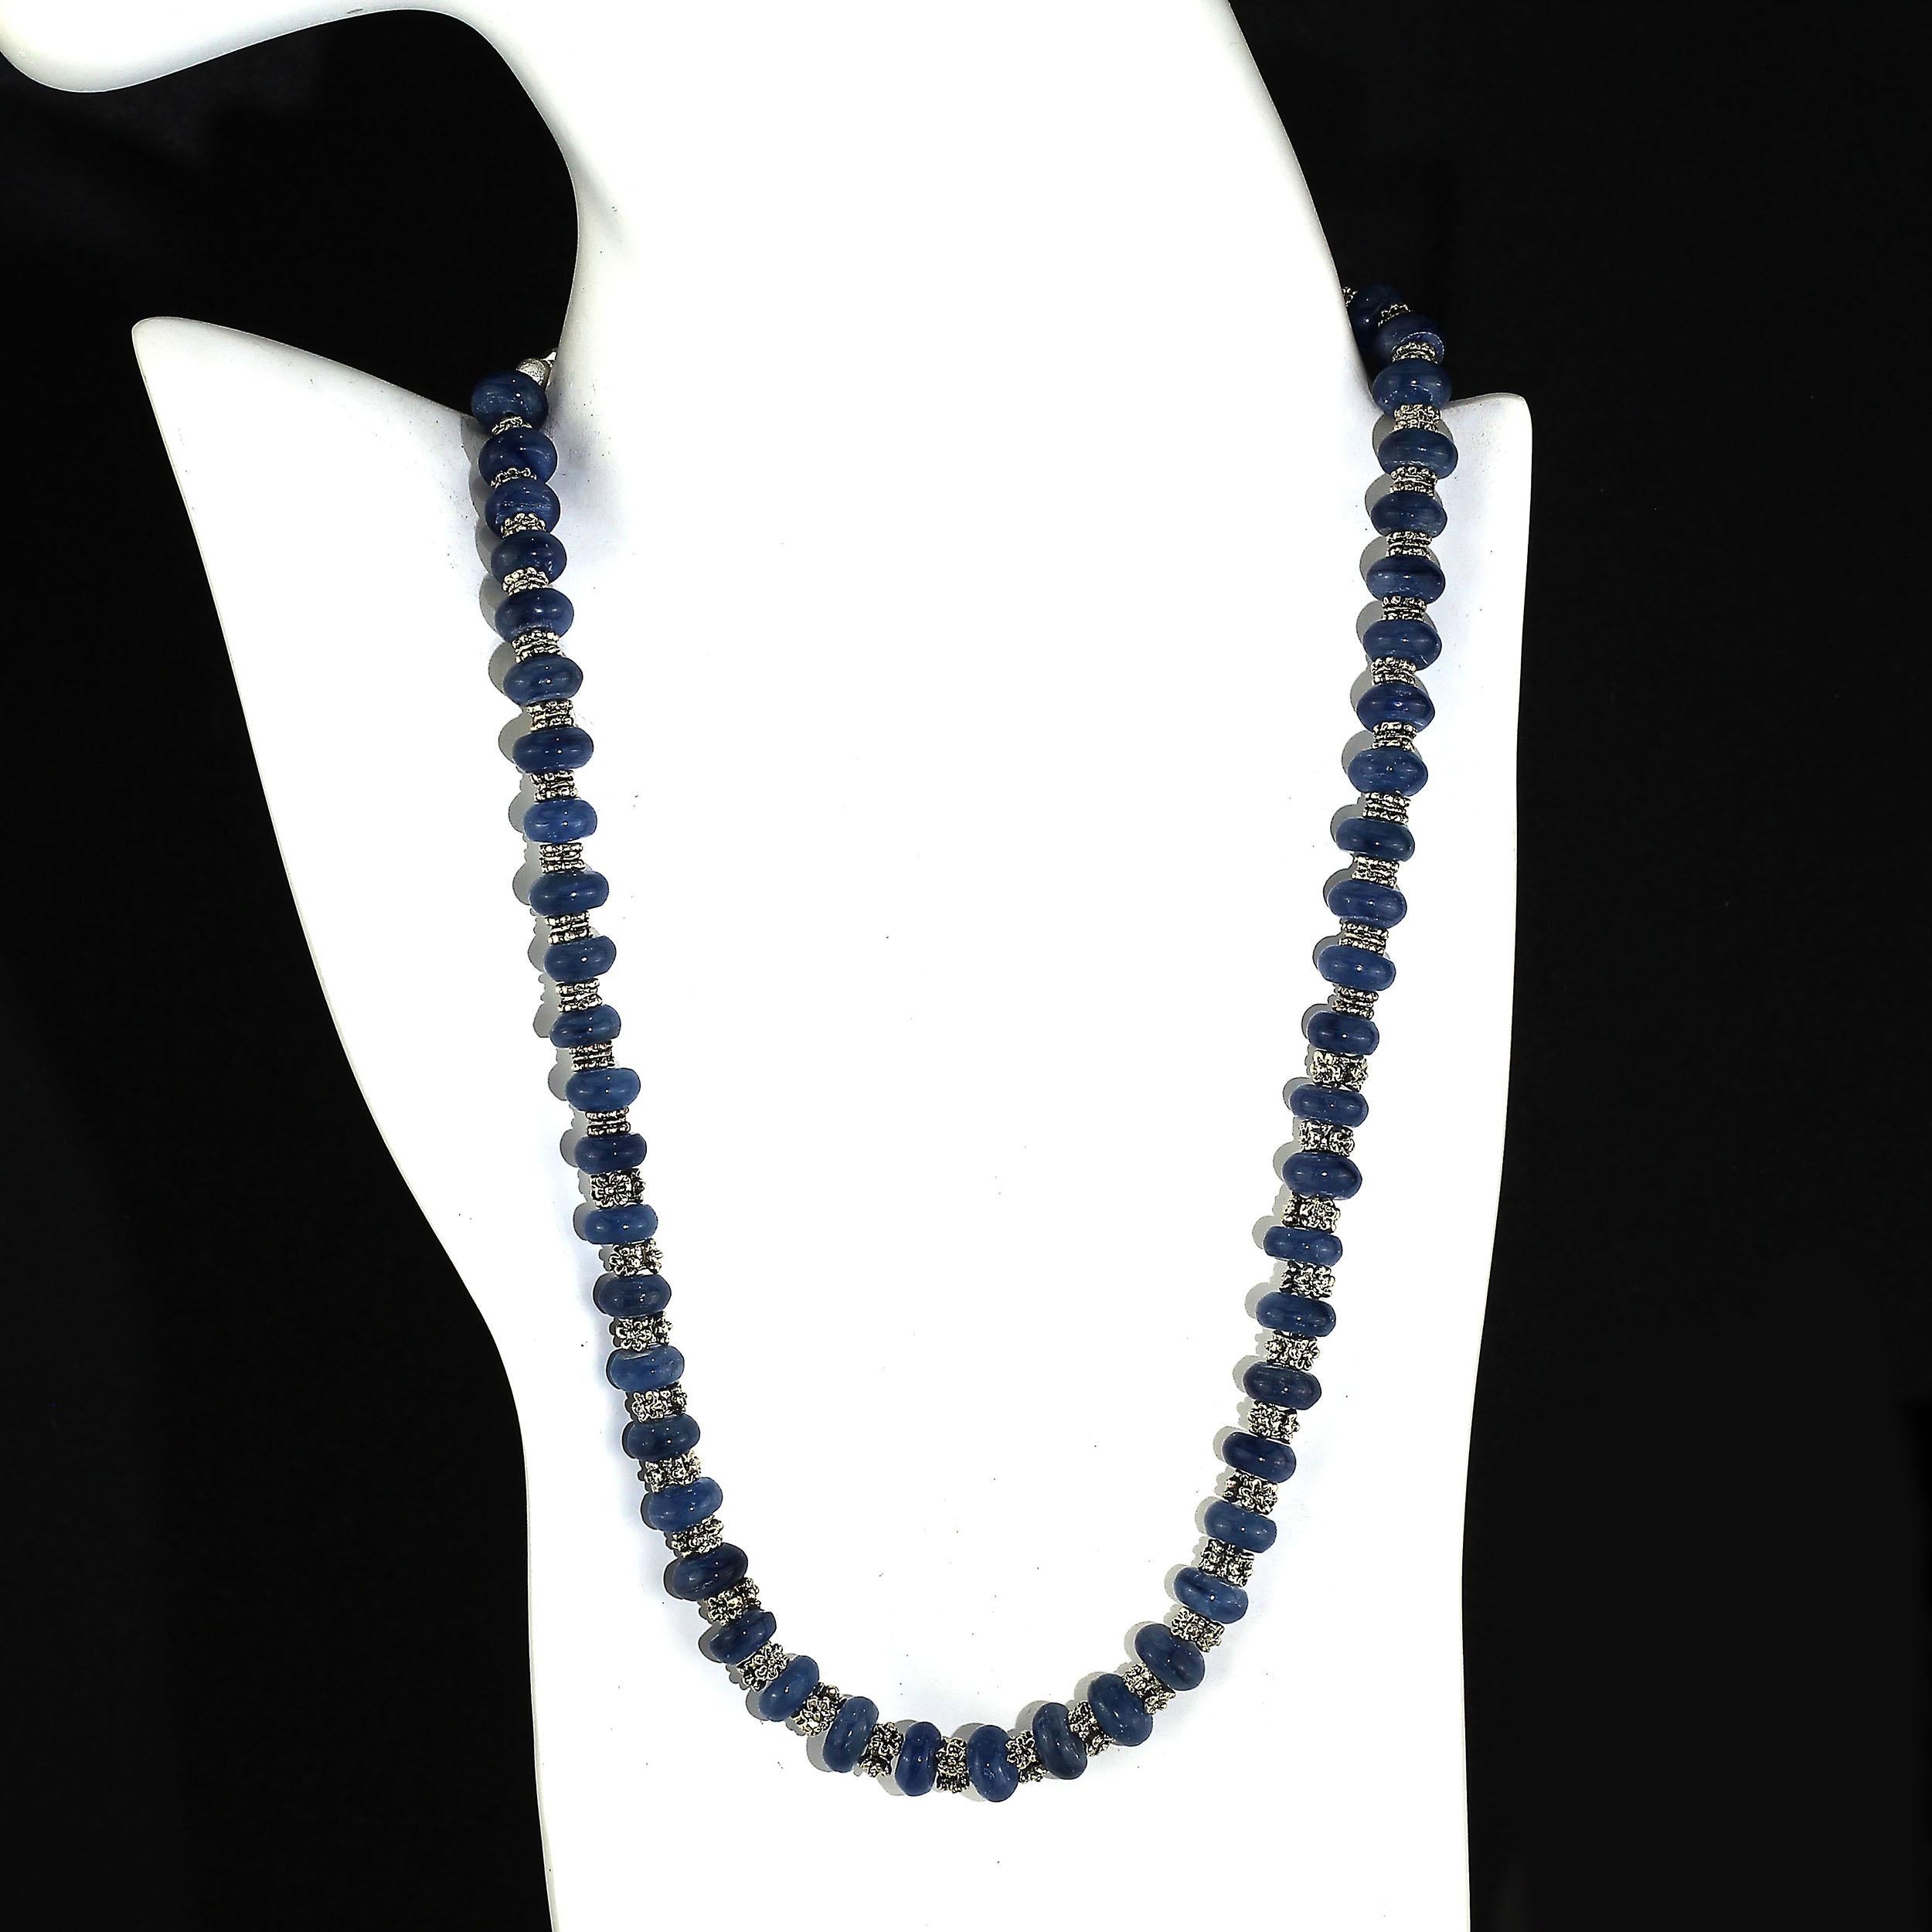 Women's or Men's  AJD Gorgeous Necklace of Blue Kyanite Alternating with Silver Bali